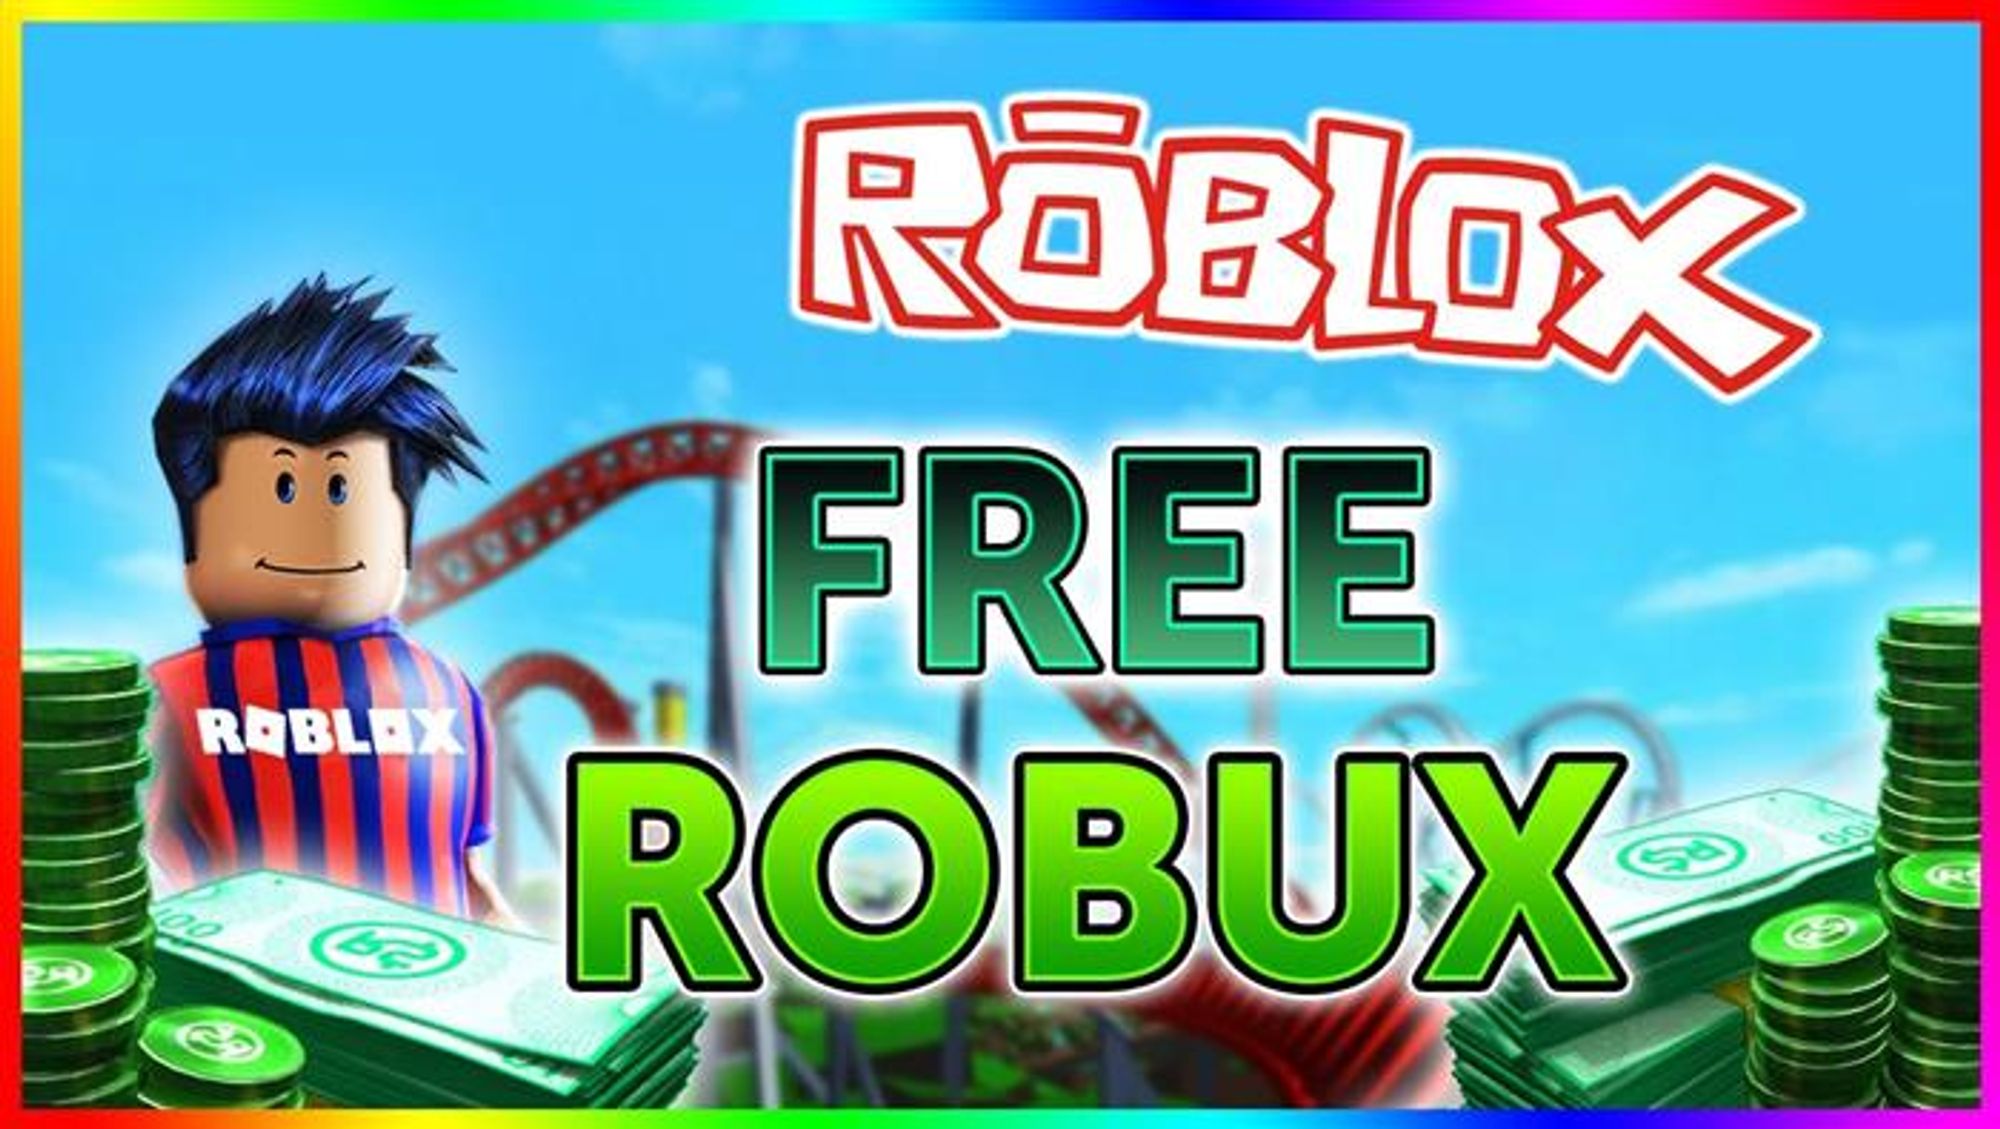 How To Lego Hack In Roblox For Free